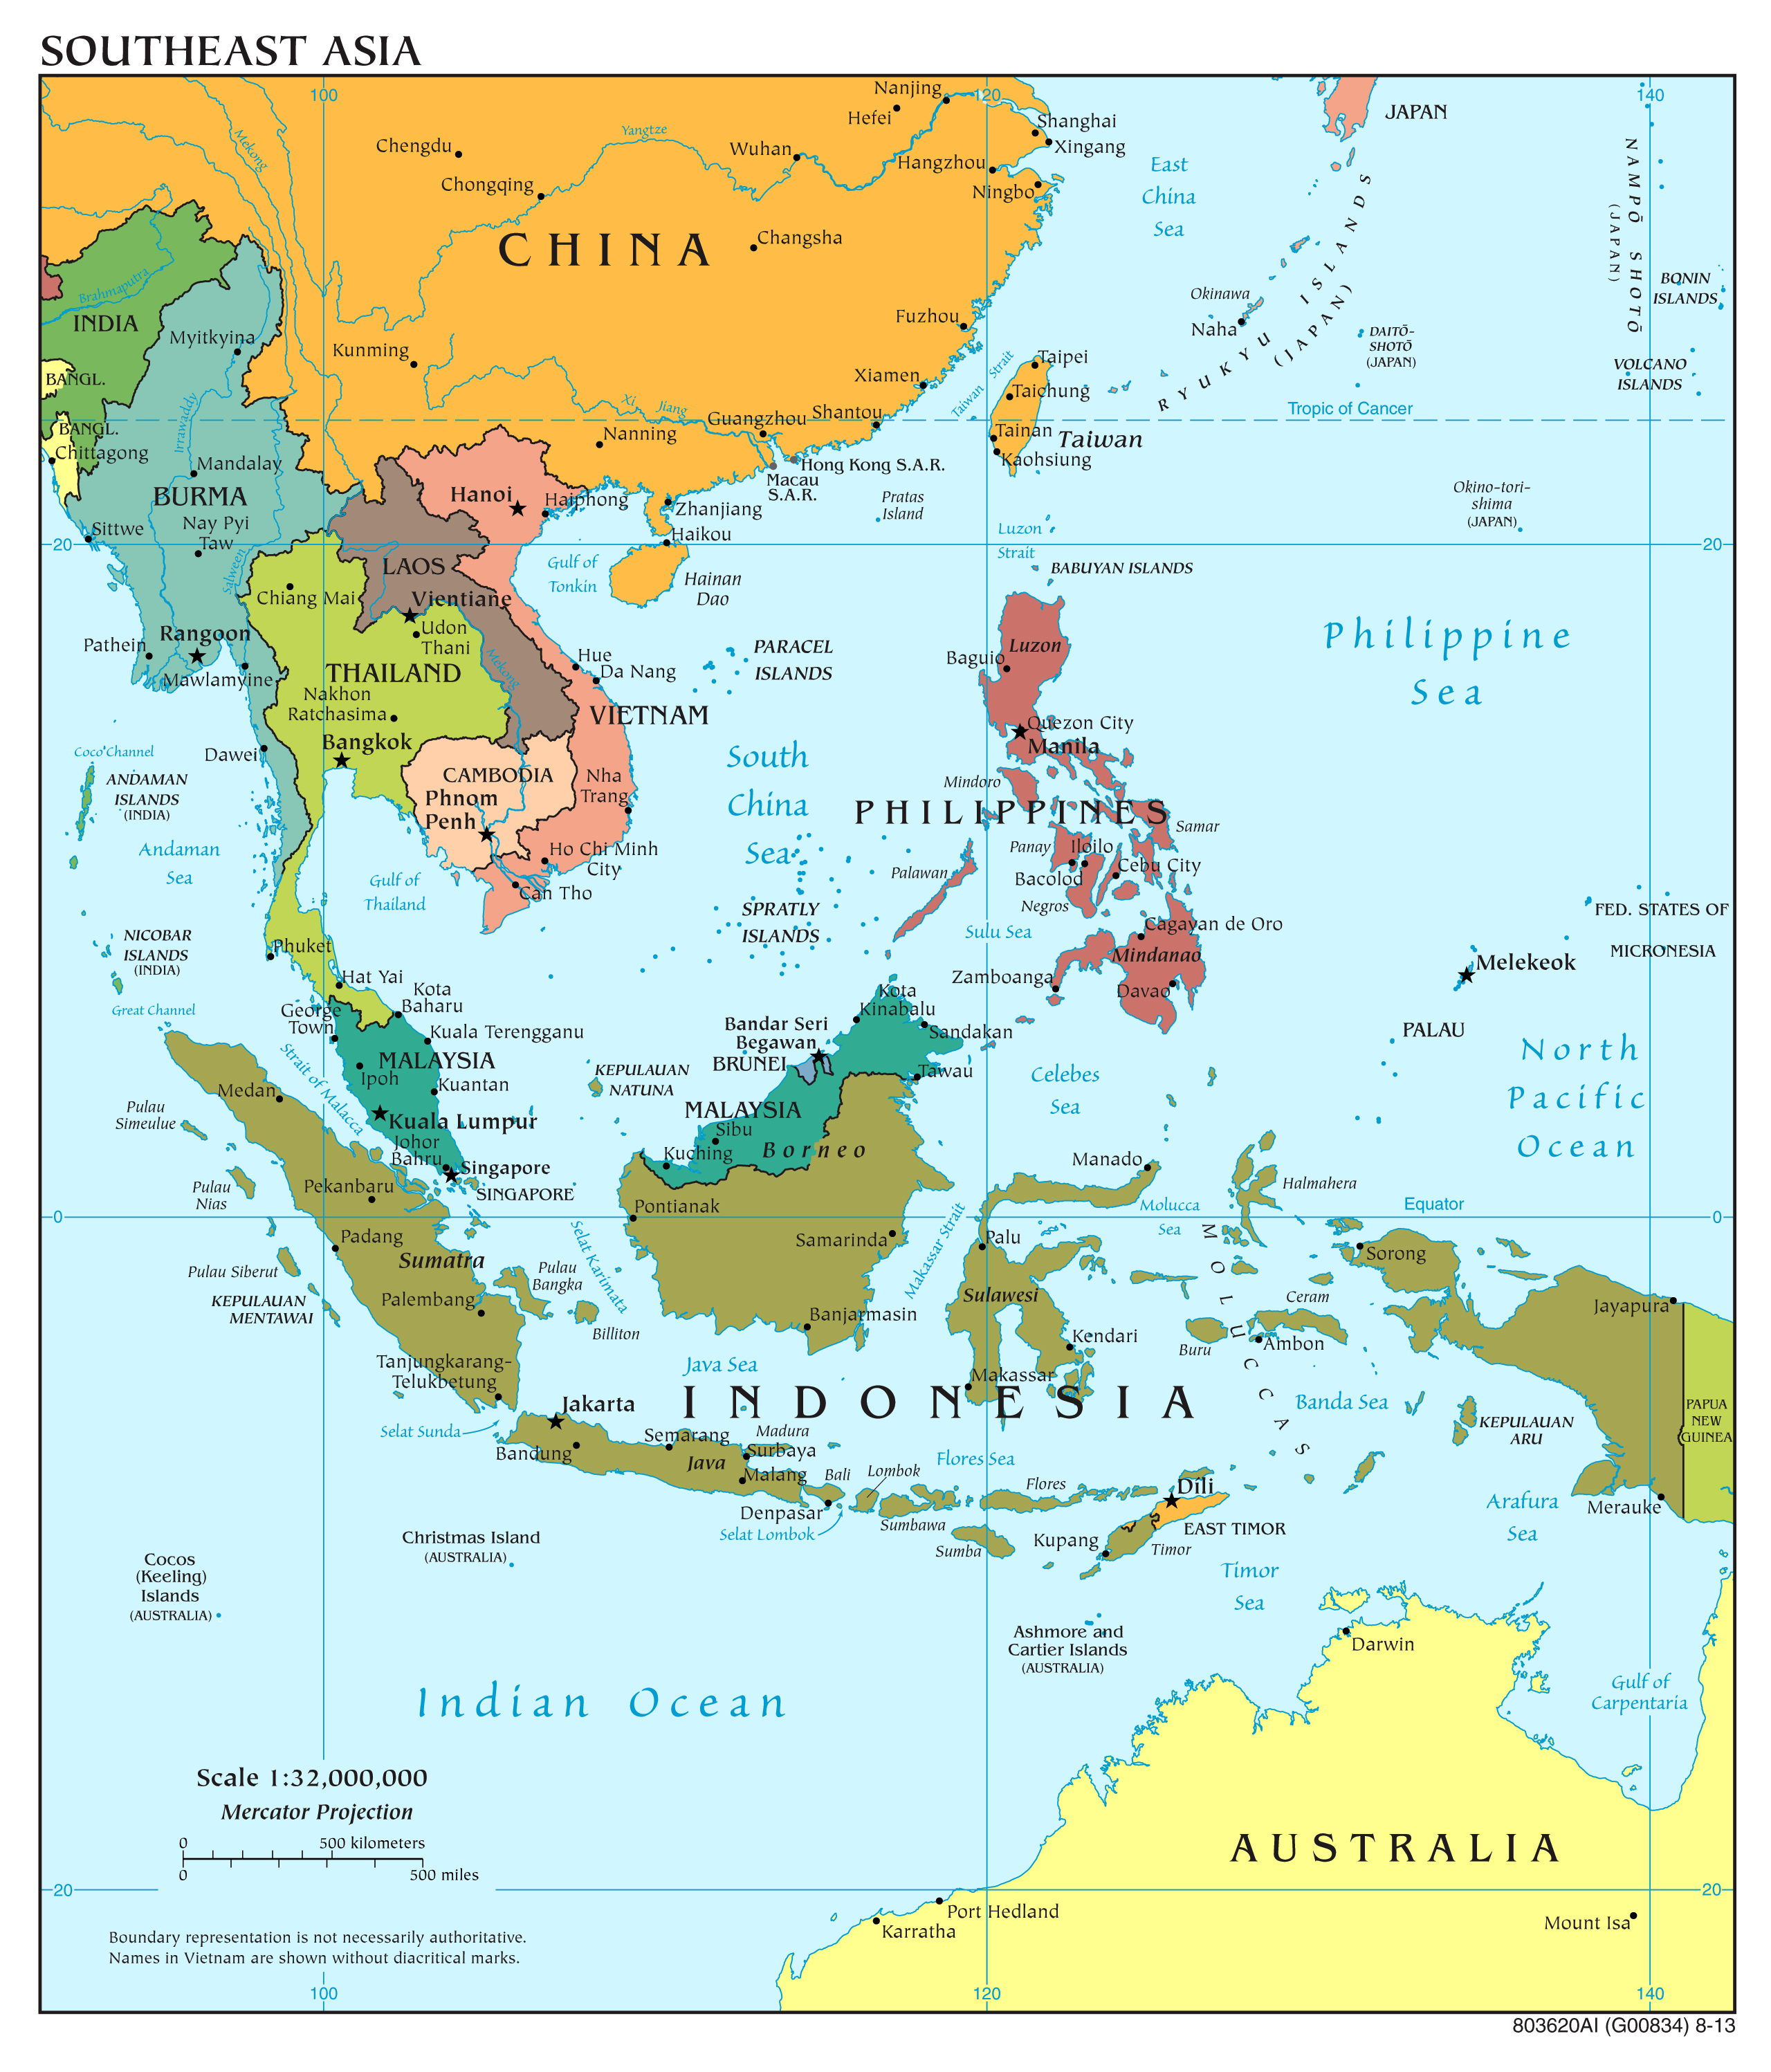 Large Scale Political Map Of Southeast Asia With Capitals And Major Cities 2013 